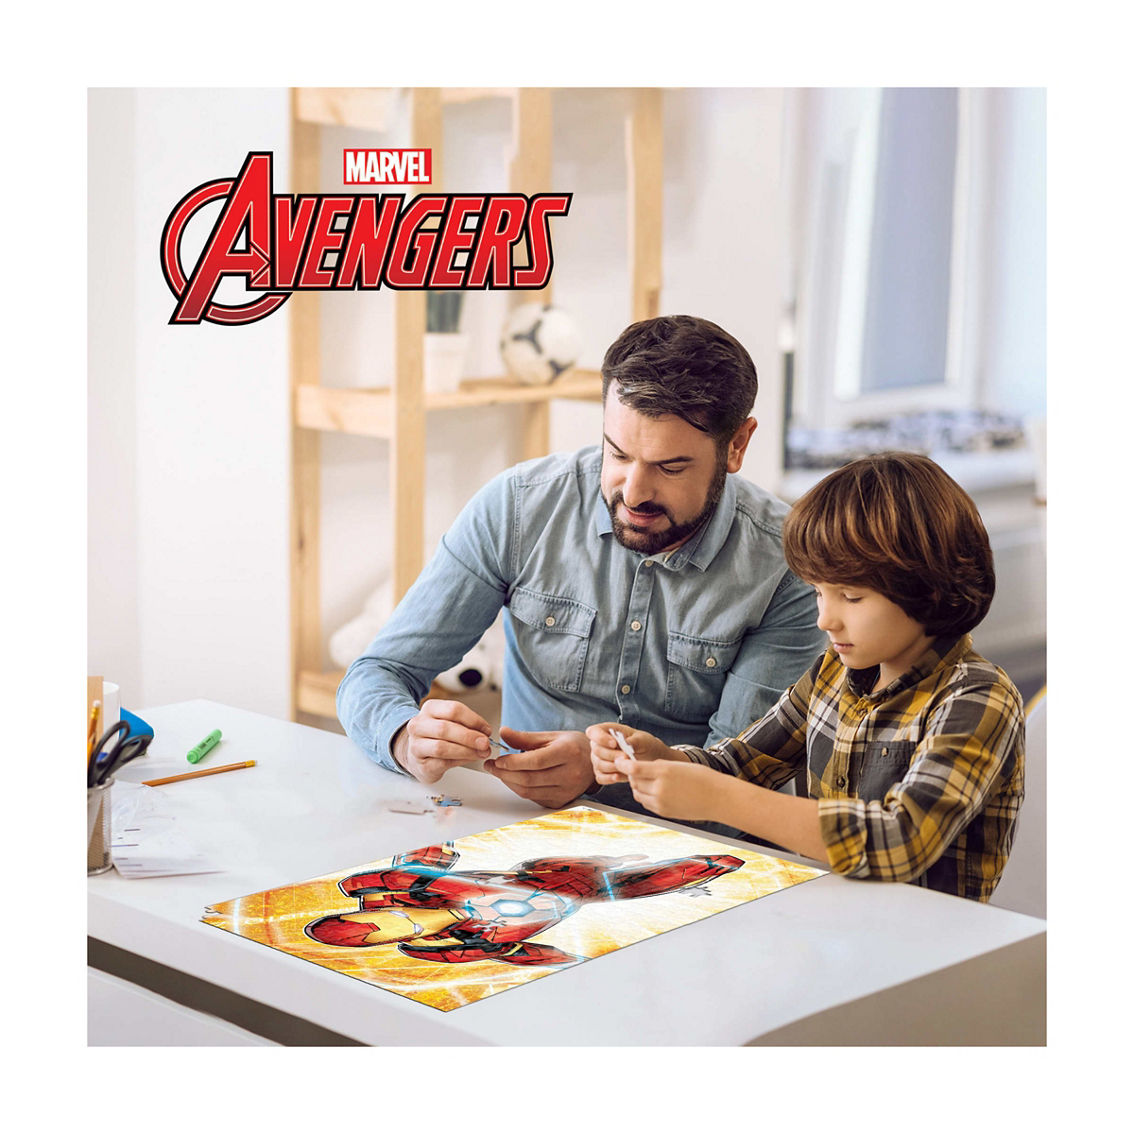 Prime 3D Marvel Avengers Iron Man 3D Lenticular Puzzle in a Shaped Tin: 300 Pcs - Image 5 of 5